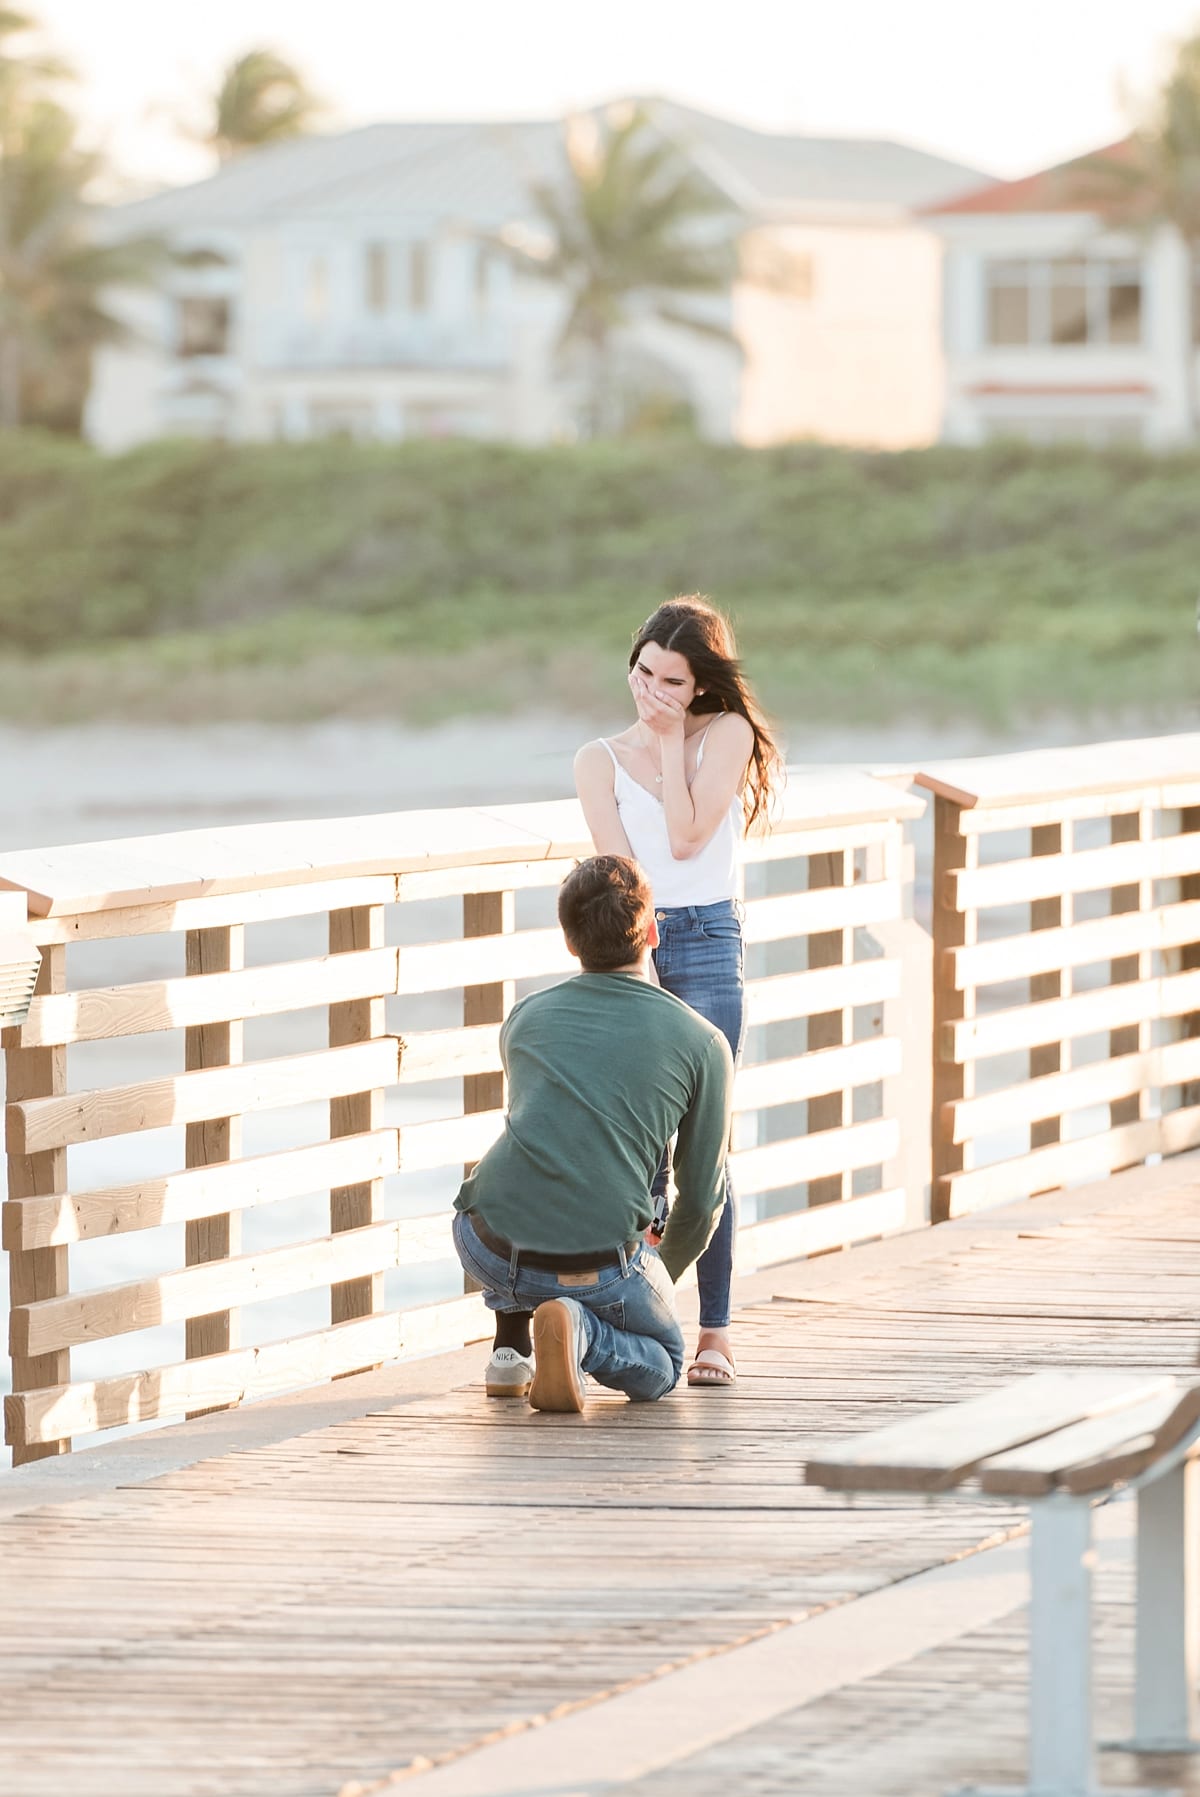 juno beach proposal pictures